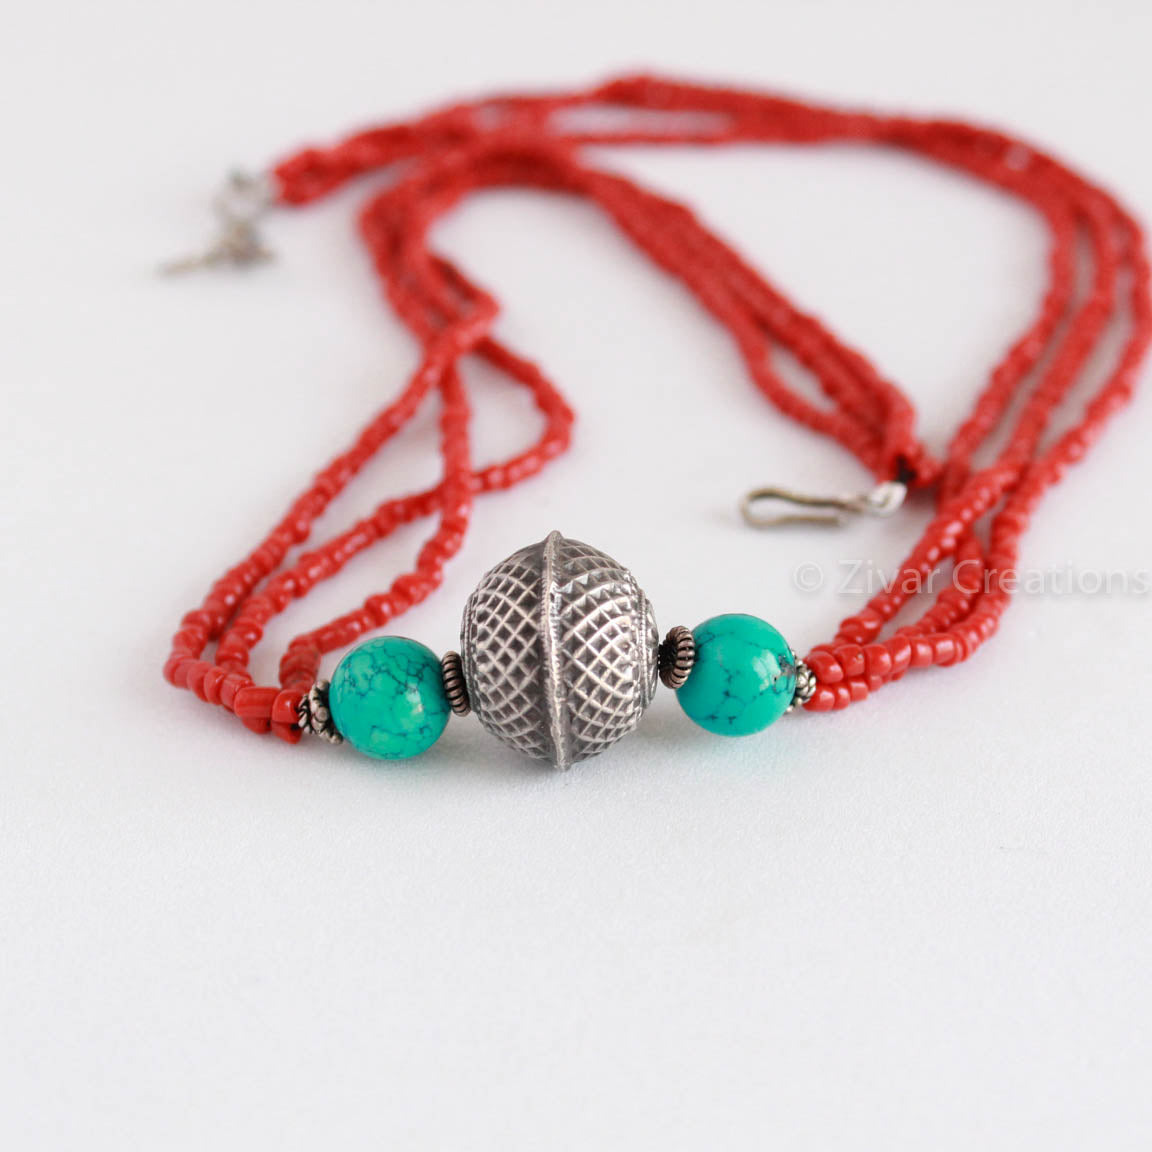 Oxidised Pure Silver Bead with coral and turquoise combination necklace